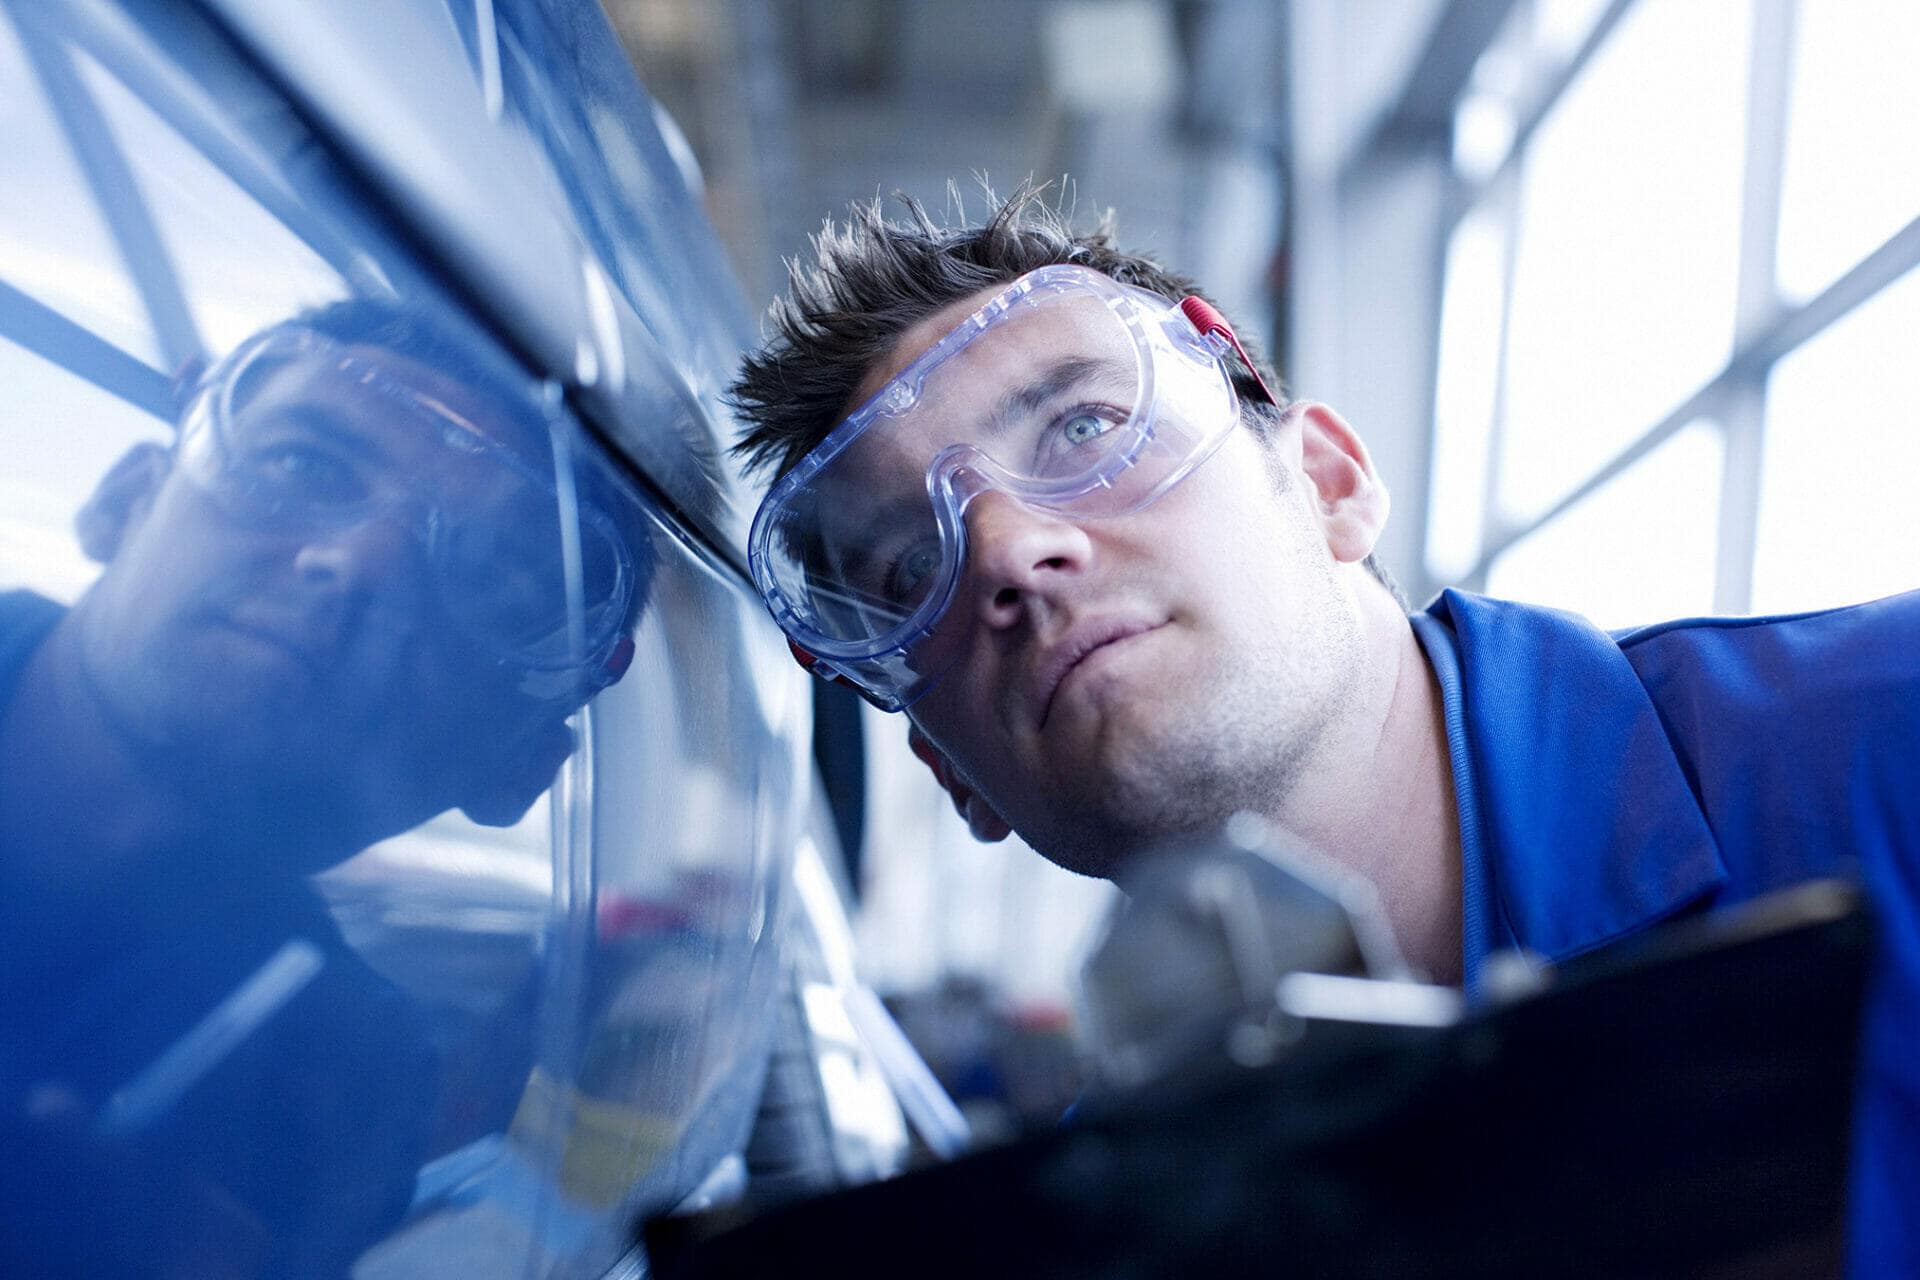 A mechanic is looking at the side of a blue car.